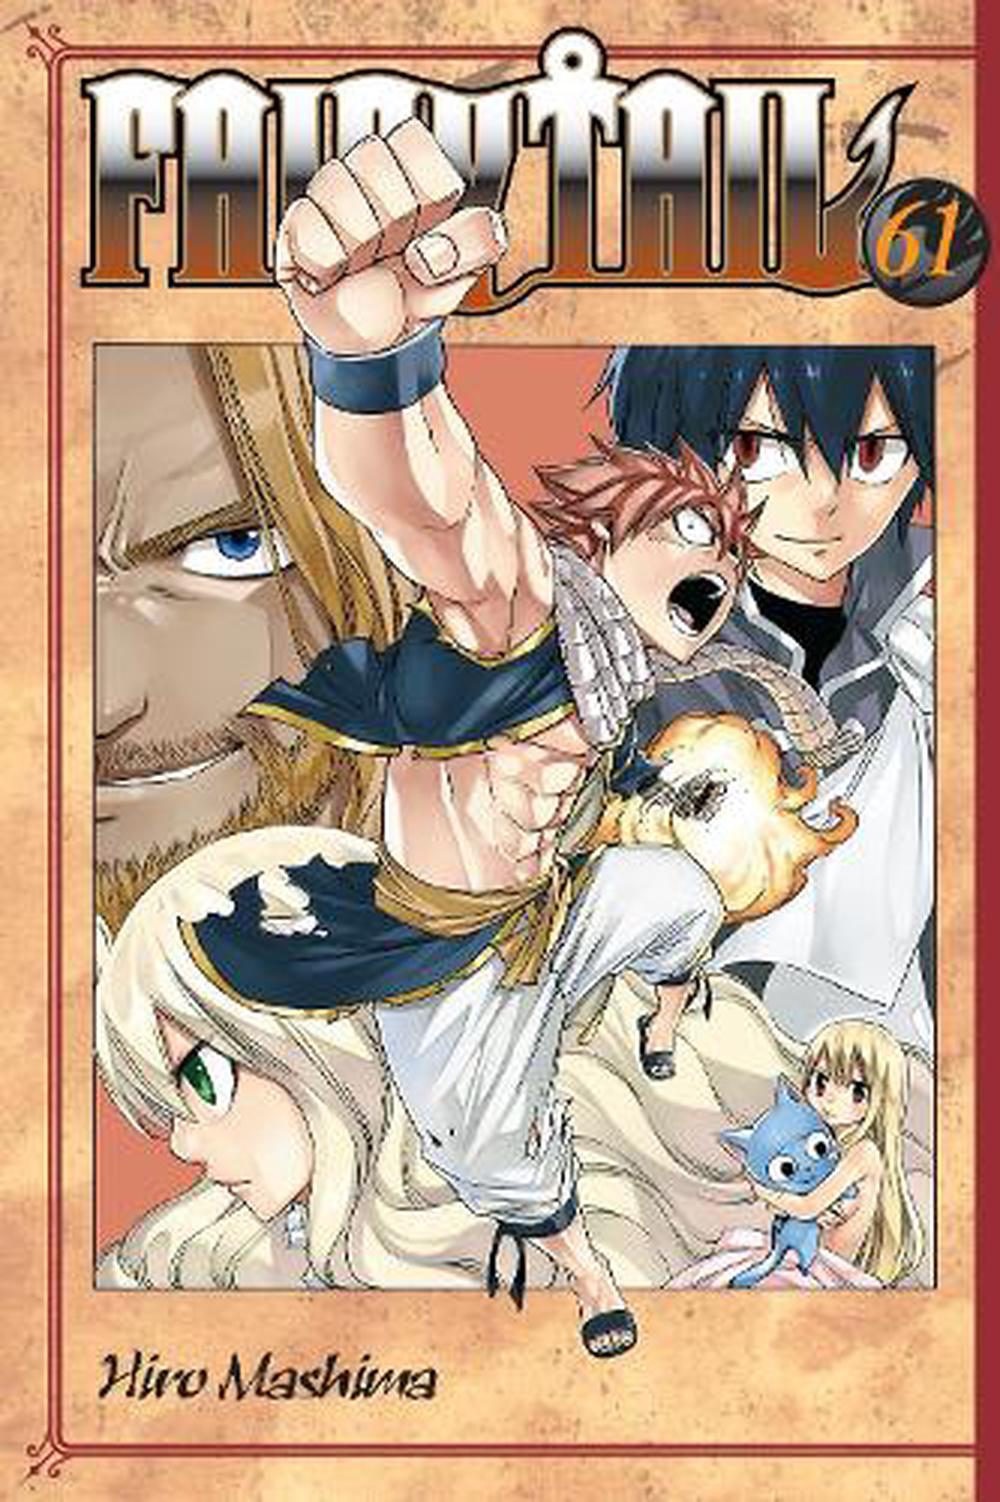 FAIRY TAIL: 100 Years Quest 14 Paperback – 2023 by Hiro Mashima